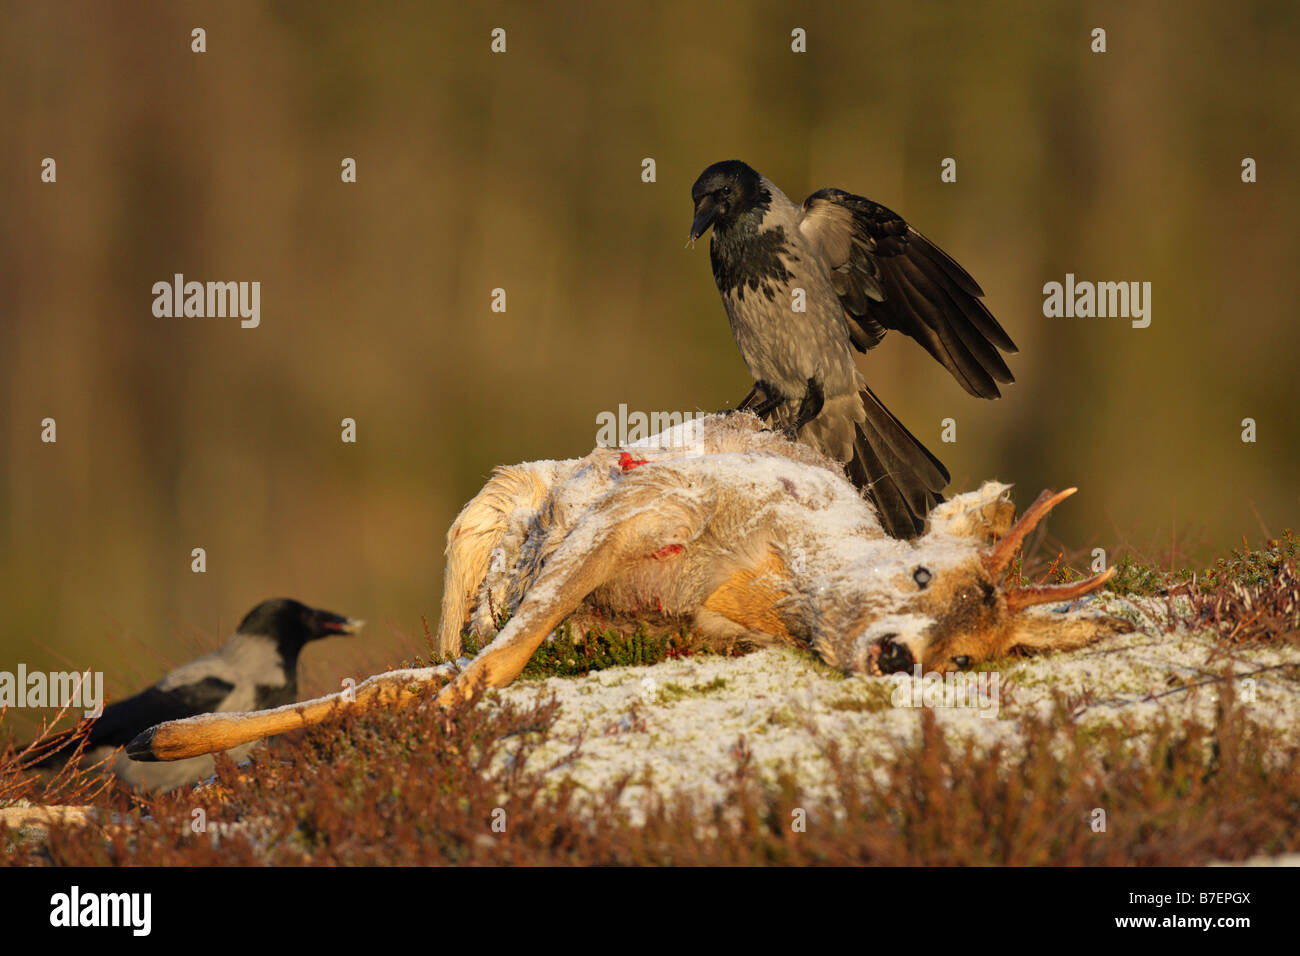 Hooded Crow Corvus corone cornix sitting on the carcass of a Roe Deer in the snow on a mountainside in norway Stock Photo